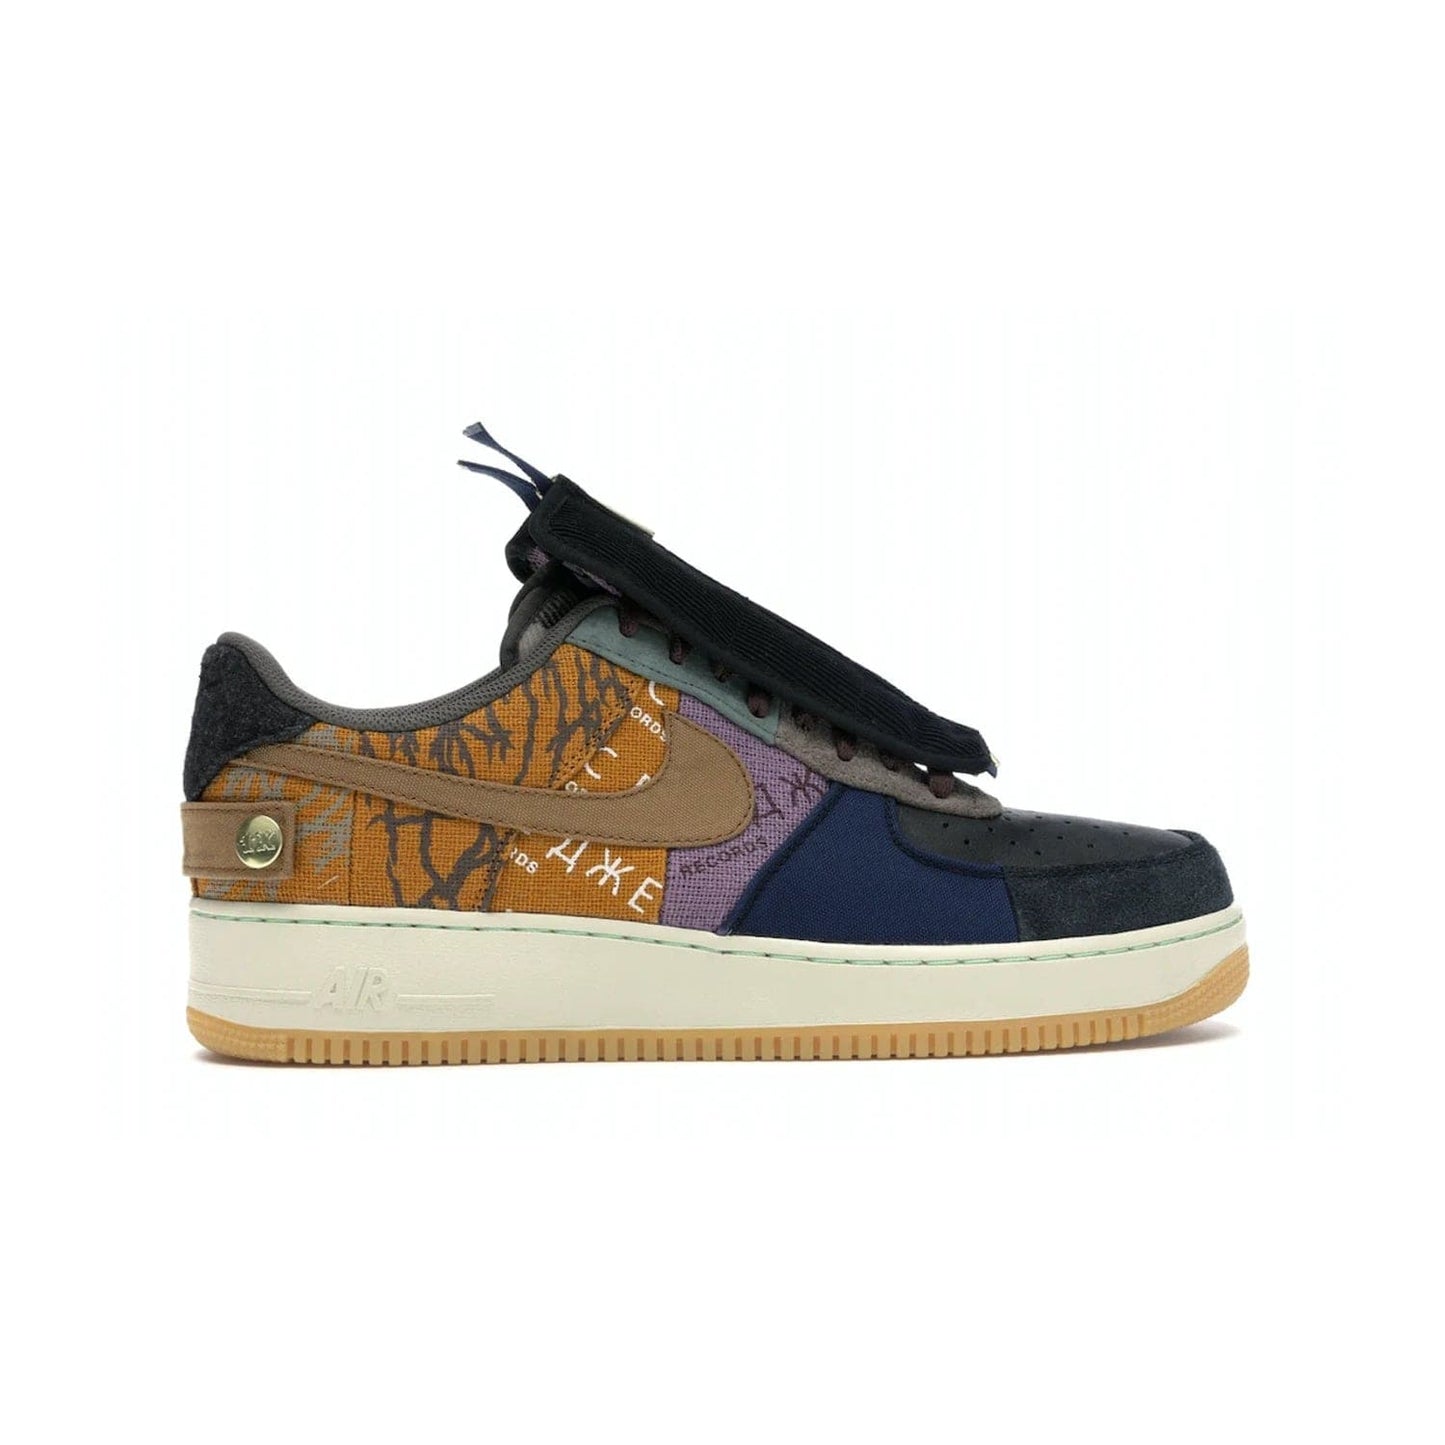 Nike Air Force 1 Low Travis Scott Cactus Jack - Image 36 - Only at www.BallersClubKickz.com - The Nike Air Force 1 Low Travis Scott Cactus Jack features a unique, multi-colored patchwork upper with muted bronze and fossil accents. Includes detachable lace cover, brass zipper, and Cactus Jack insignias. A sail midsole, gum rubber outsole complete the eye-catching design. Perfect for comfort and style with unexpected touches of detail.